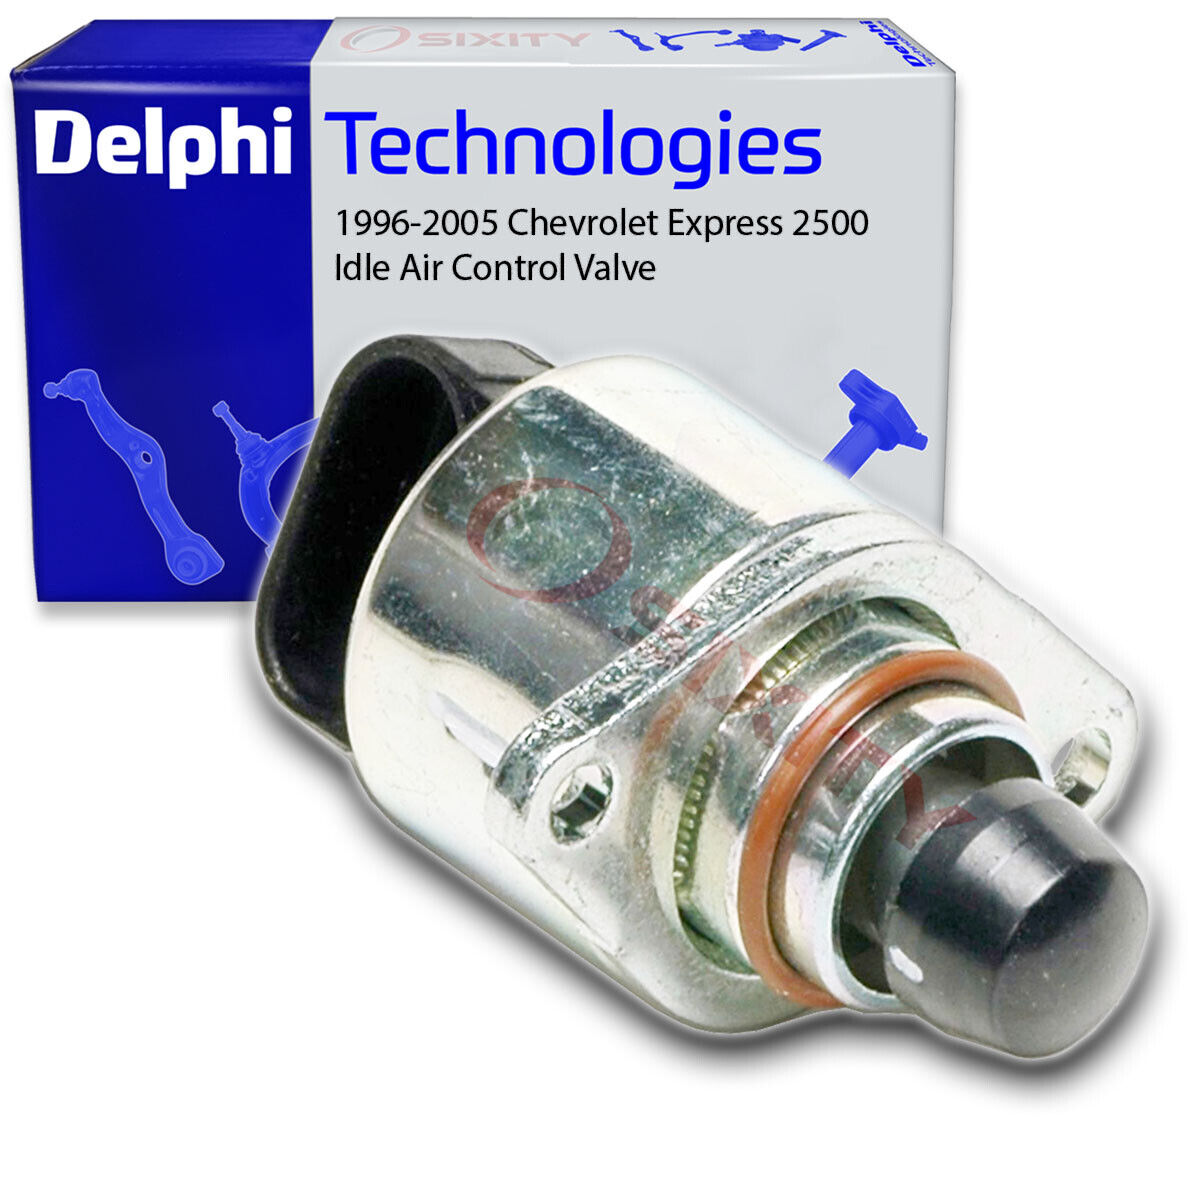 Delphi Fuel Injection Idle Air Control Valve for 1996-2005 Chevrolet Express px